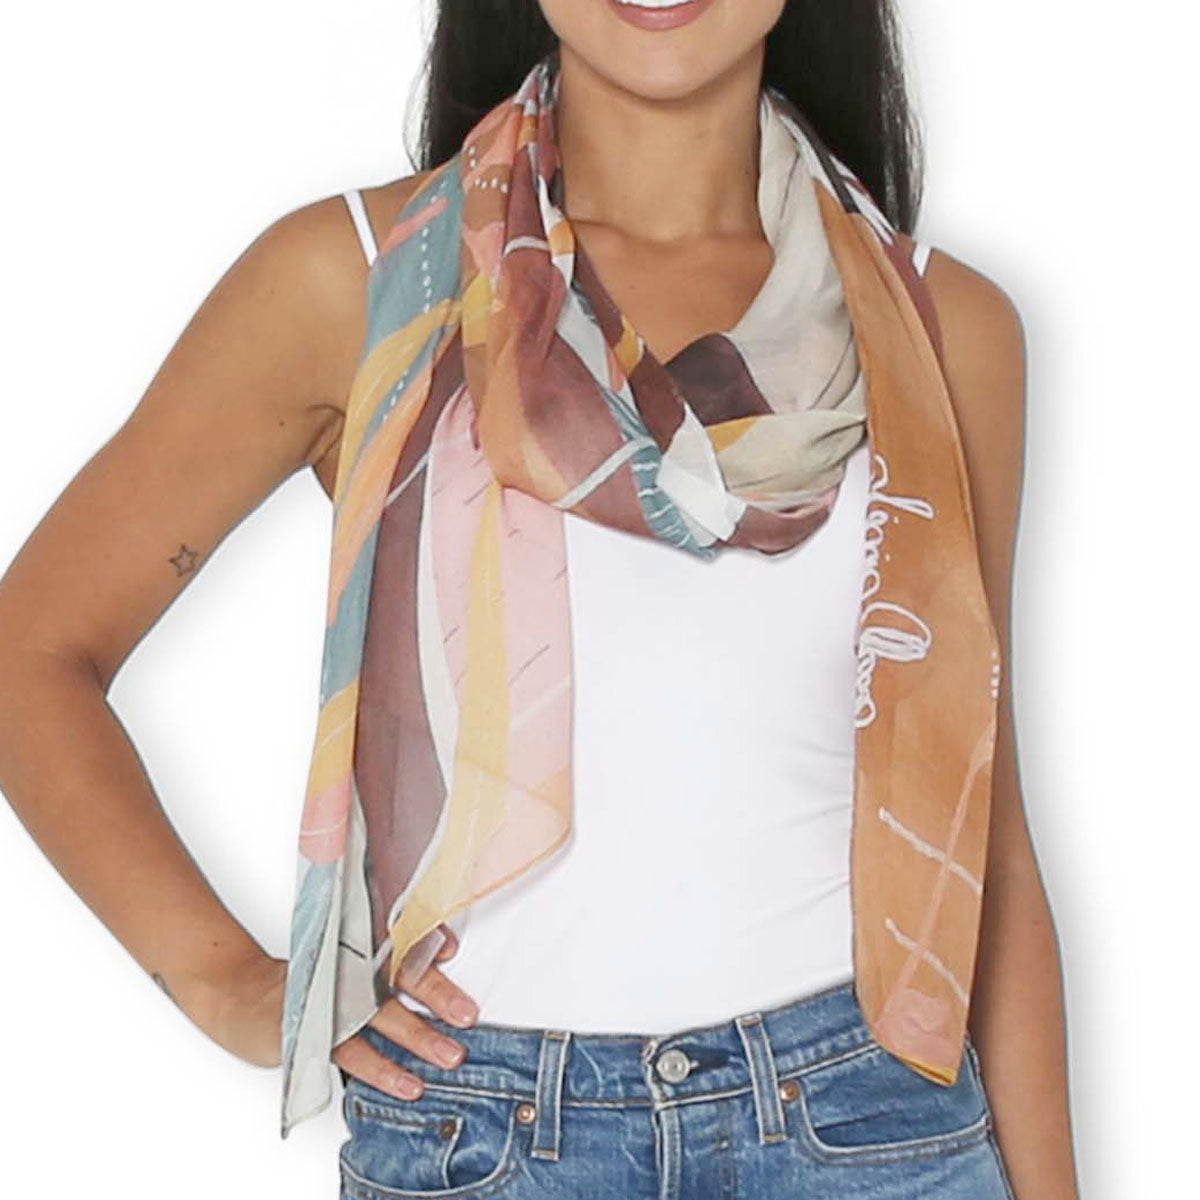 The Artists Label 'Embracing Change' Silk Scarf